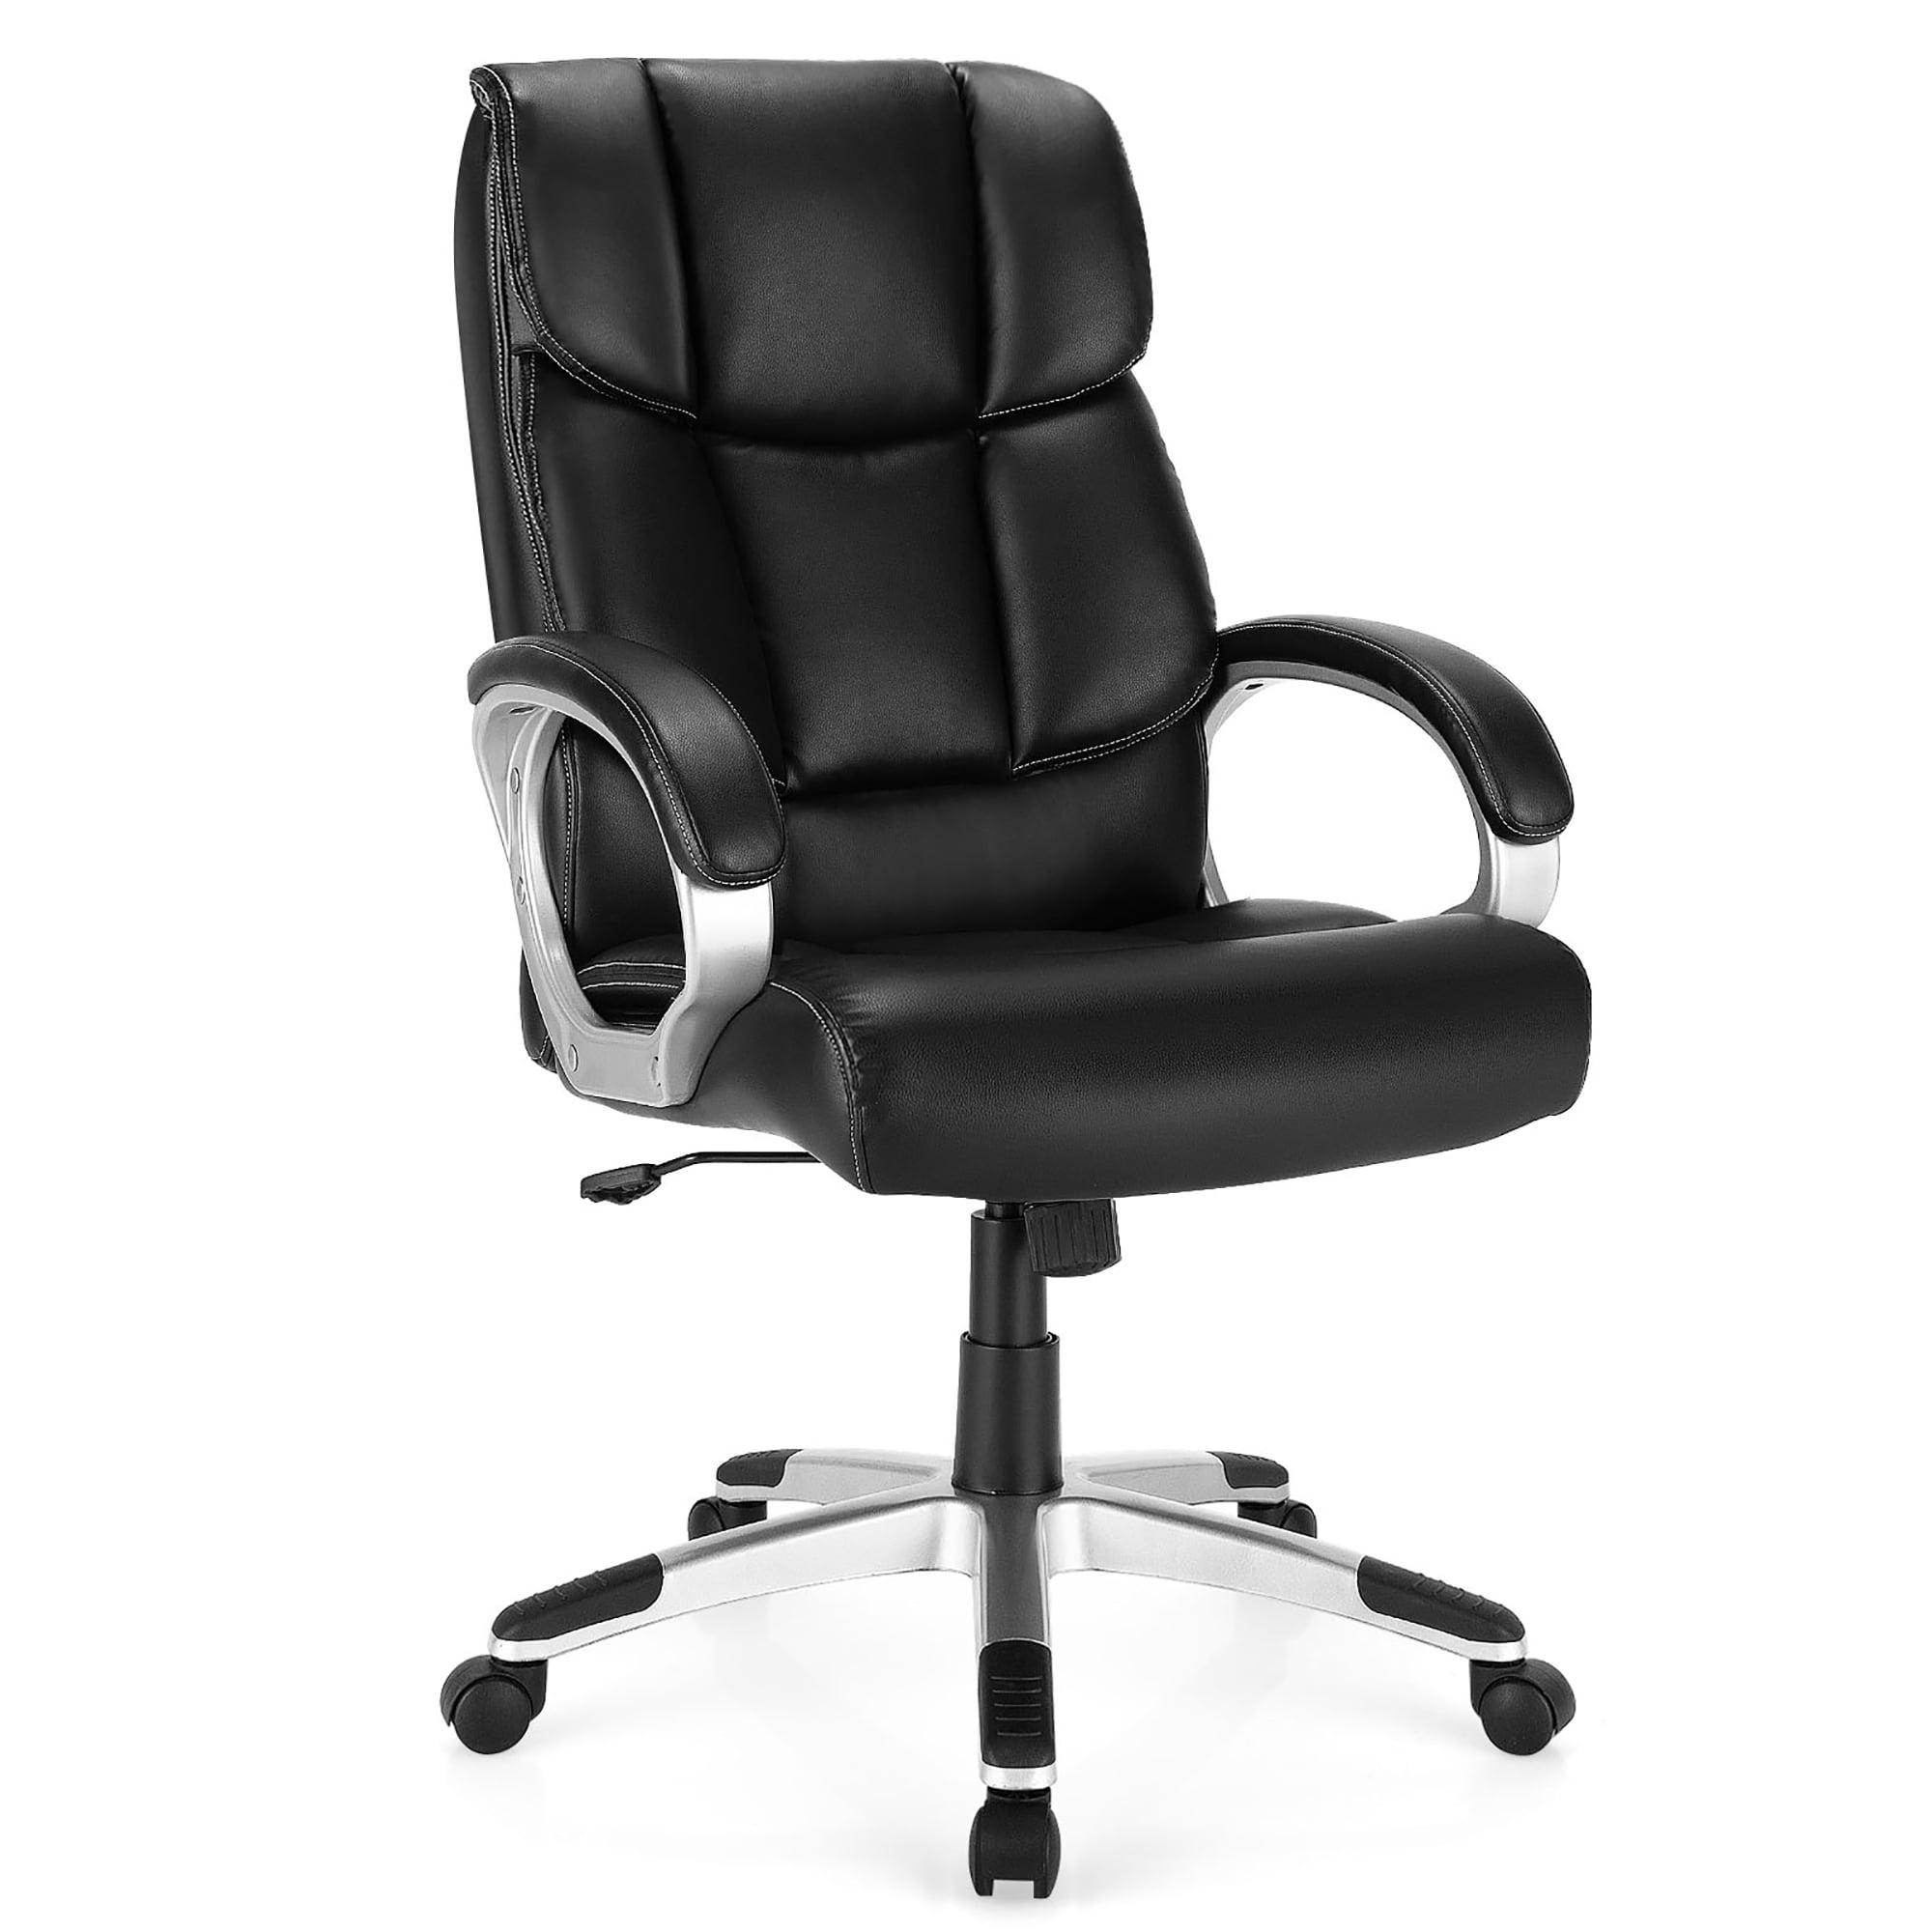 Ergonomic High Back Swivel Executive Chair in Black Faux Leather